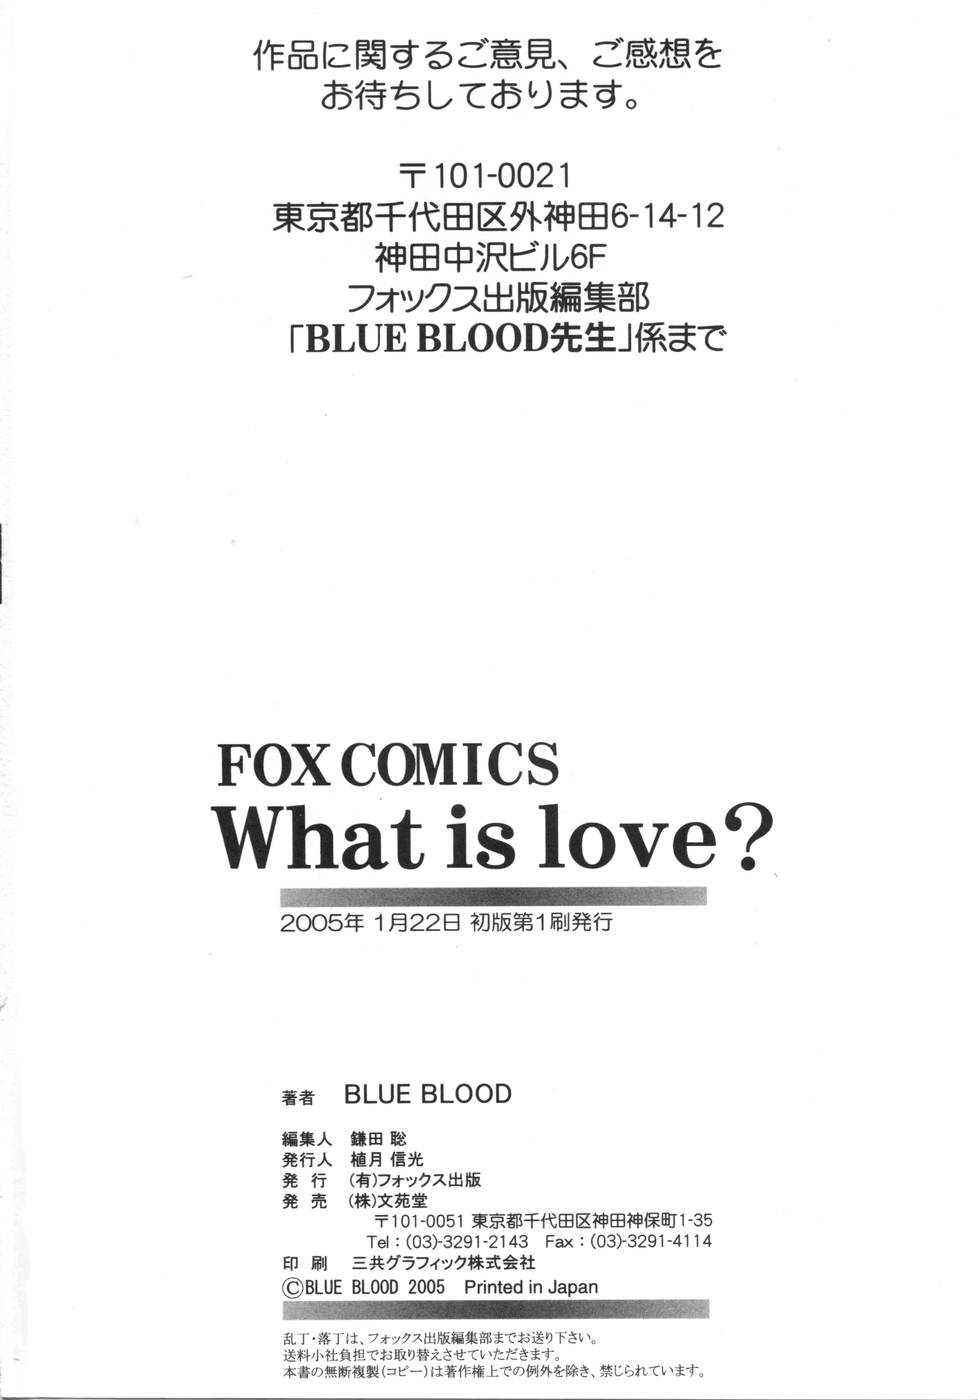 [BLUE BLOOD] What is love?